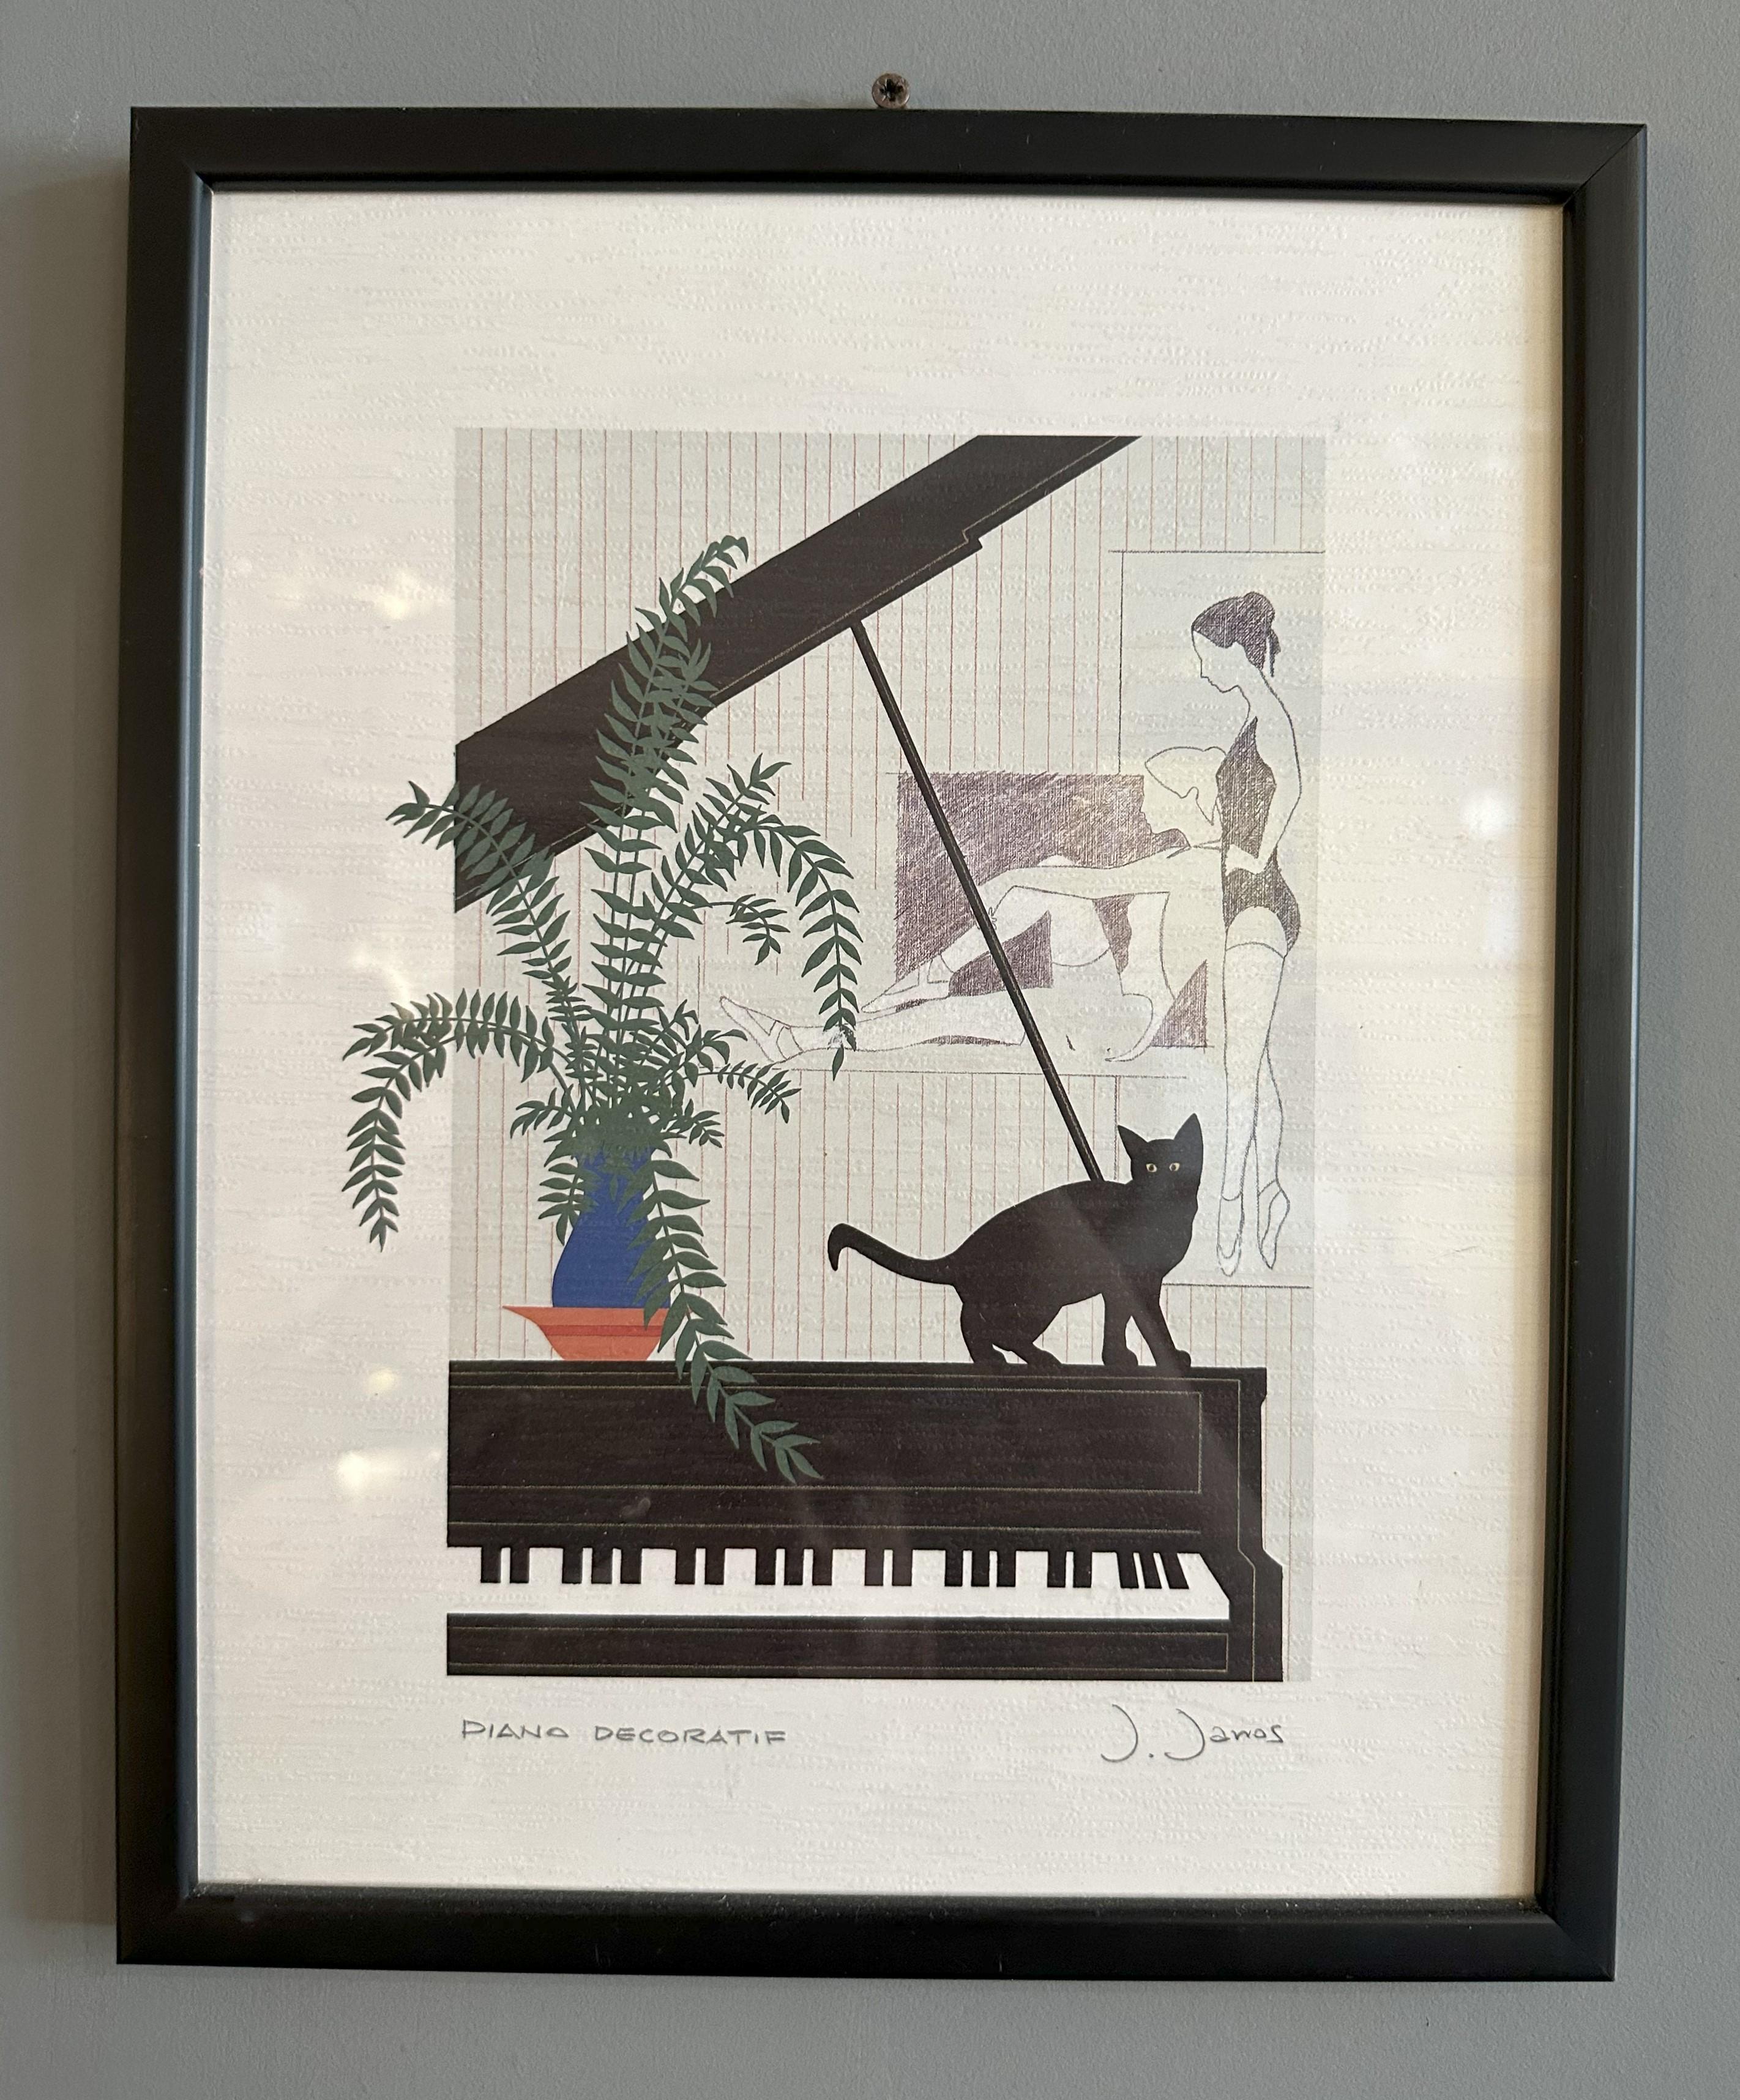 Mid-Century Modern 'PIANO DECORATIF' lithograph print by J. Janos 
Lithograph created by J.Janos dating back to around the 1980s.

Dimensions: 26cm x 32cmh
Very good conditions